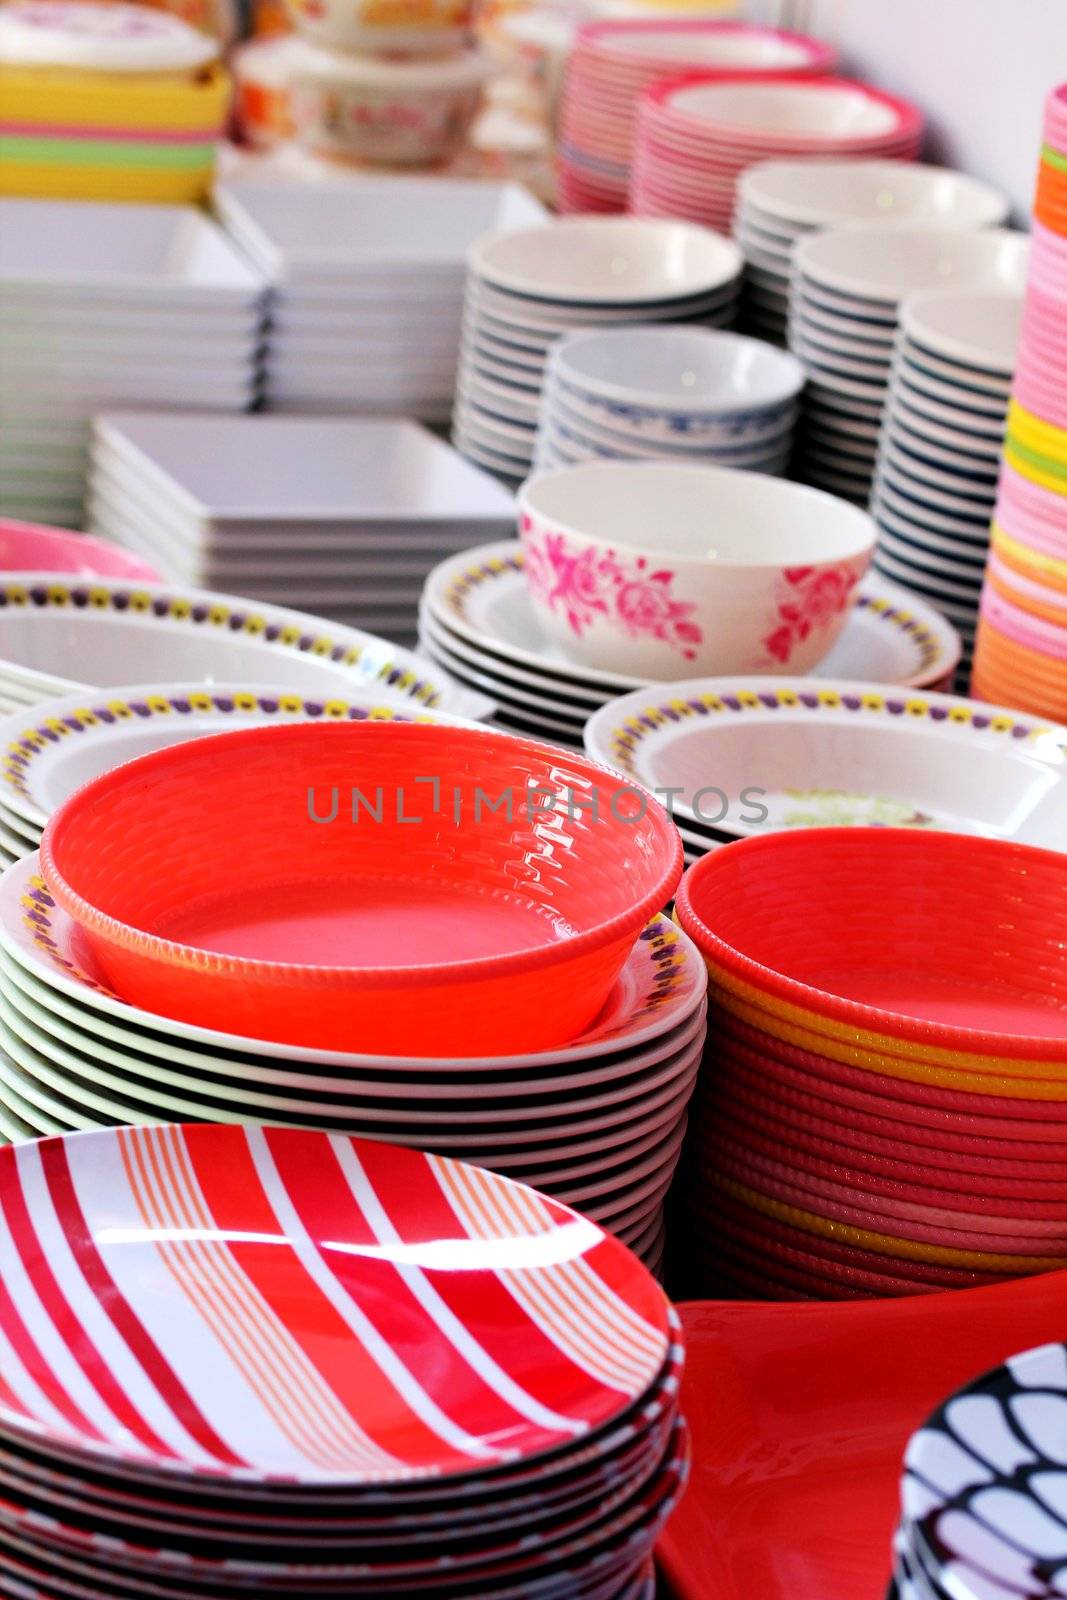 Colorful melamine, ceramic, china clay and plastic bowls arranged for sale in a market